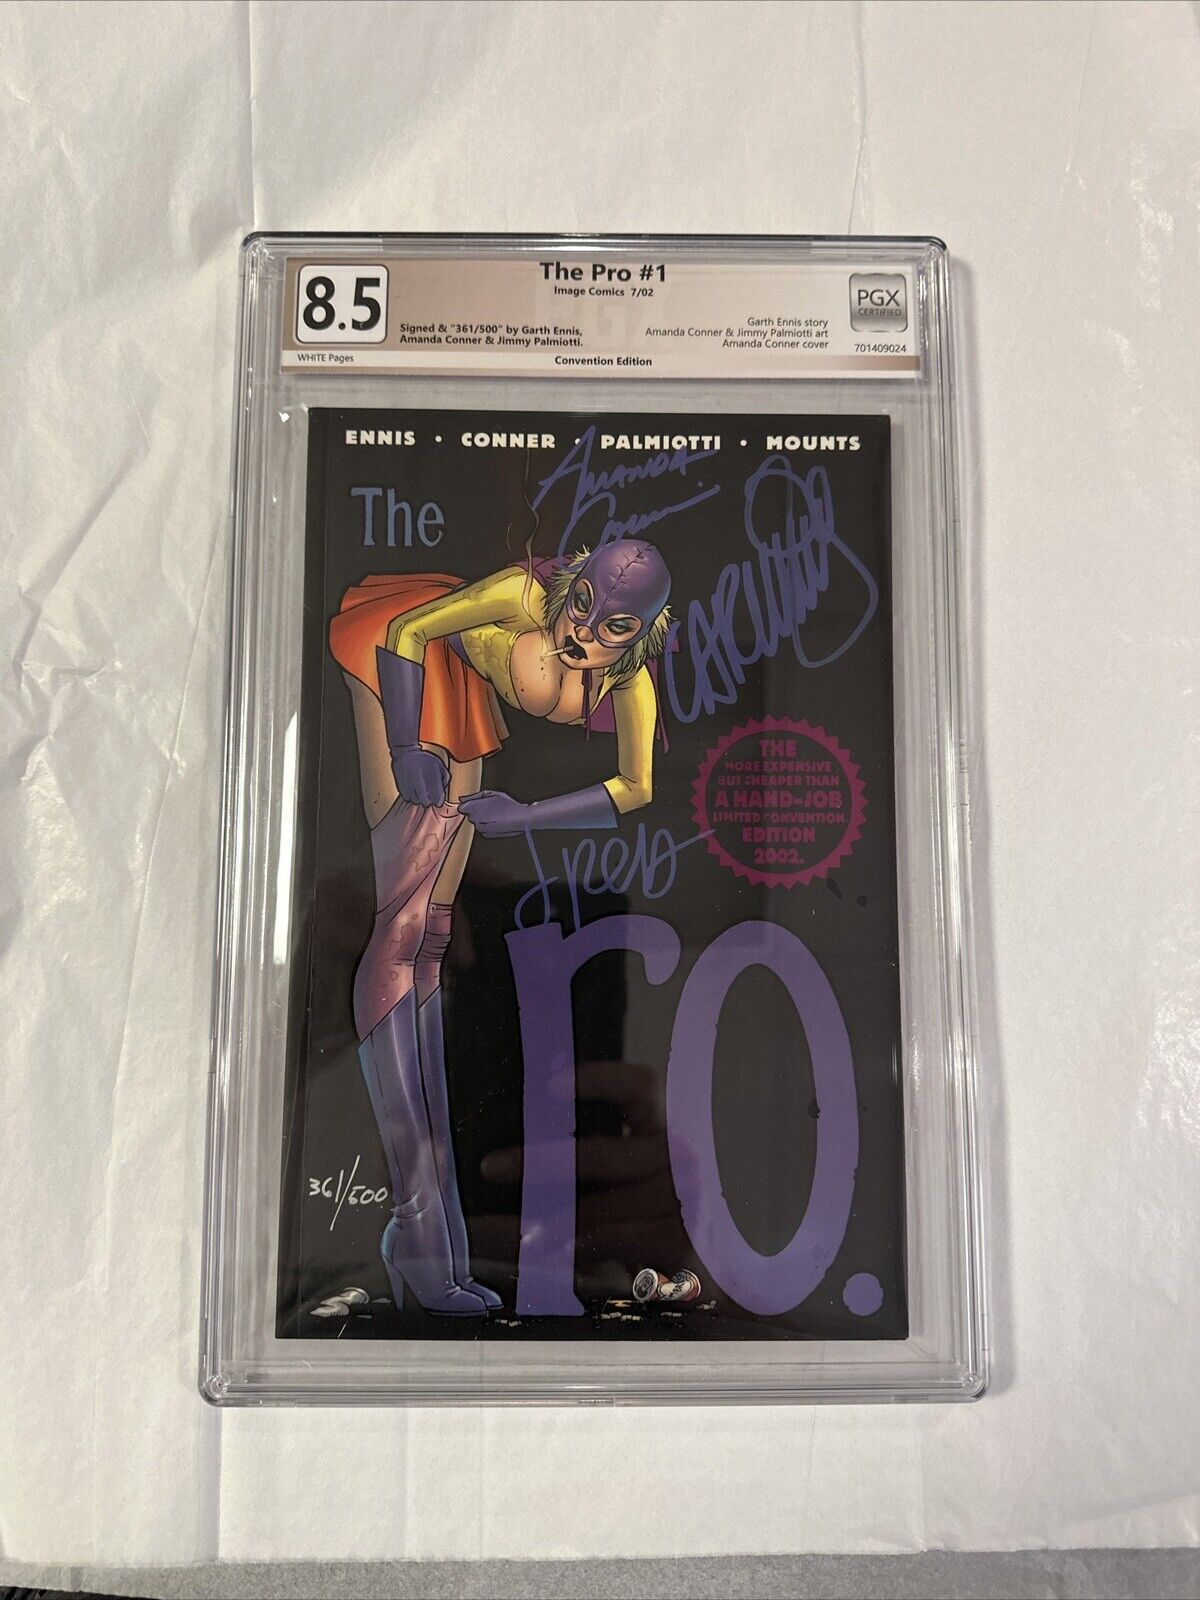 The Pro #1 PGX 8.5 signed Conner,  Palmiotti, & Ennis Convention Edition 361/500